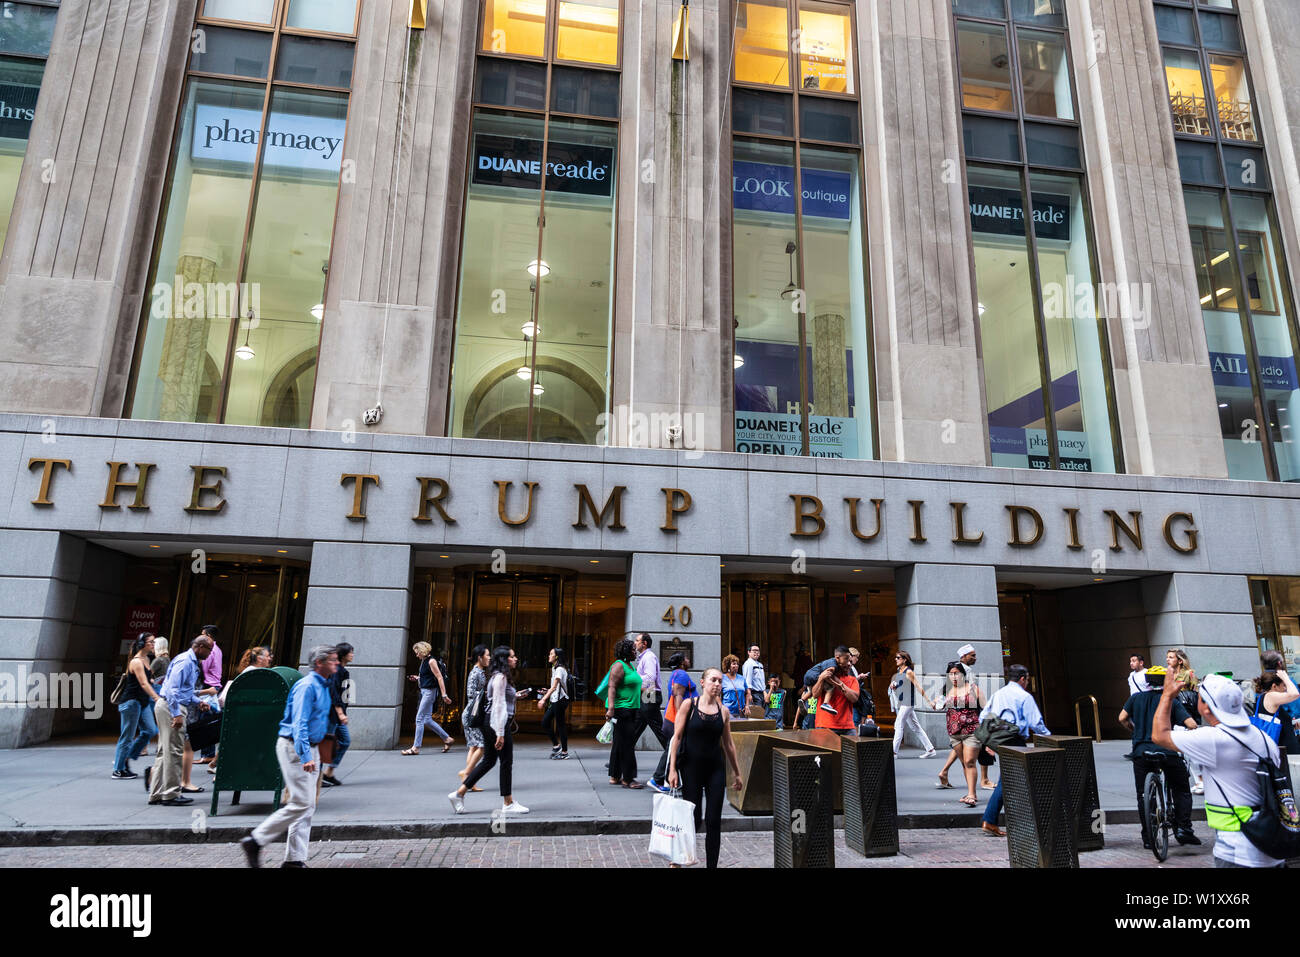 New York City, USA - August 1, 2018: Facade of The Trump Building on 40 Wall Street with people around in Manhattan, New York City, USA Stock Photo